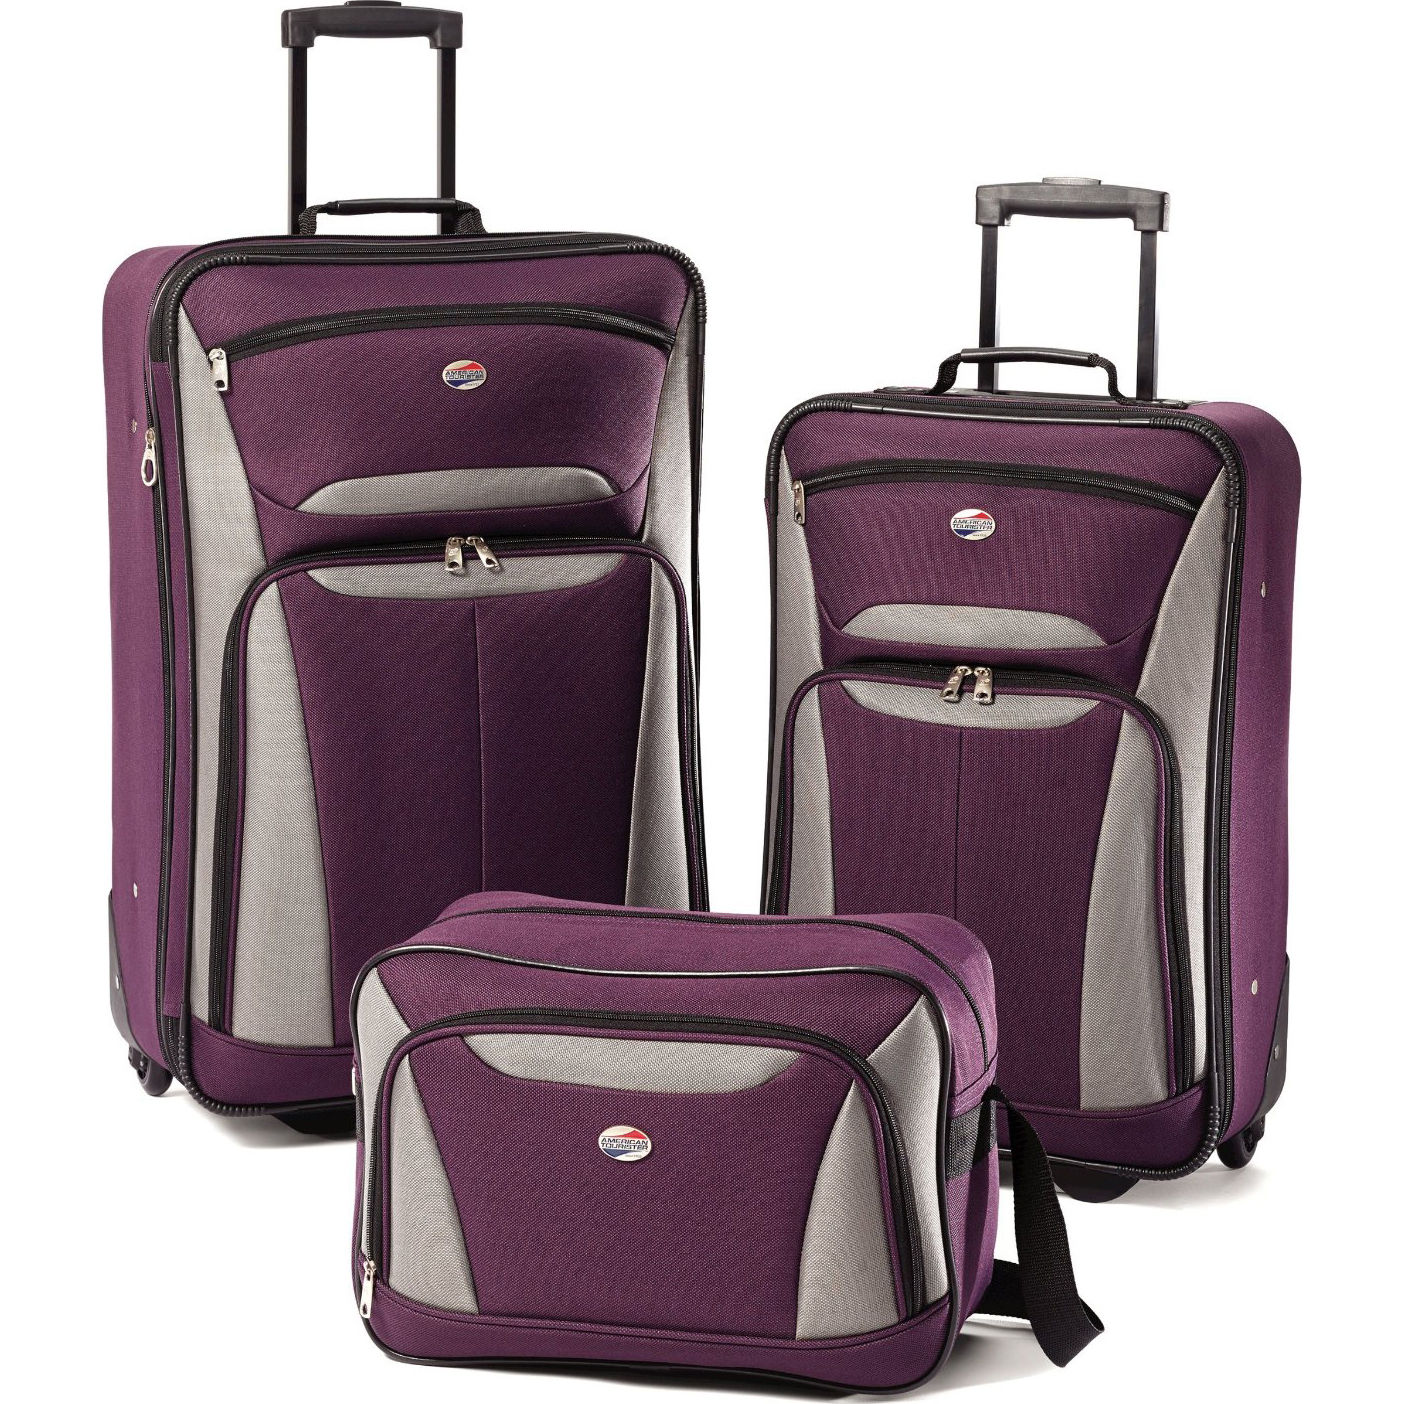 American Tourister Fieldbrook II 3-pc Luggage Set Only $39.99!!